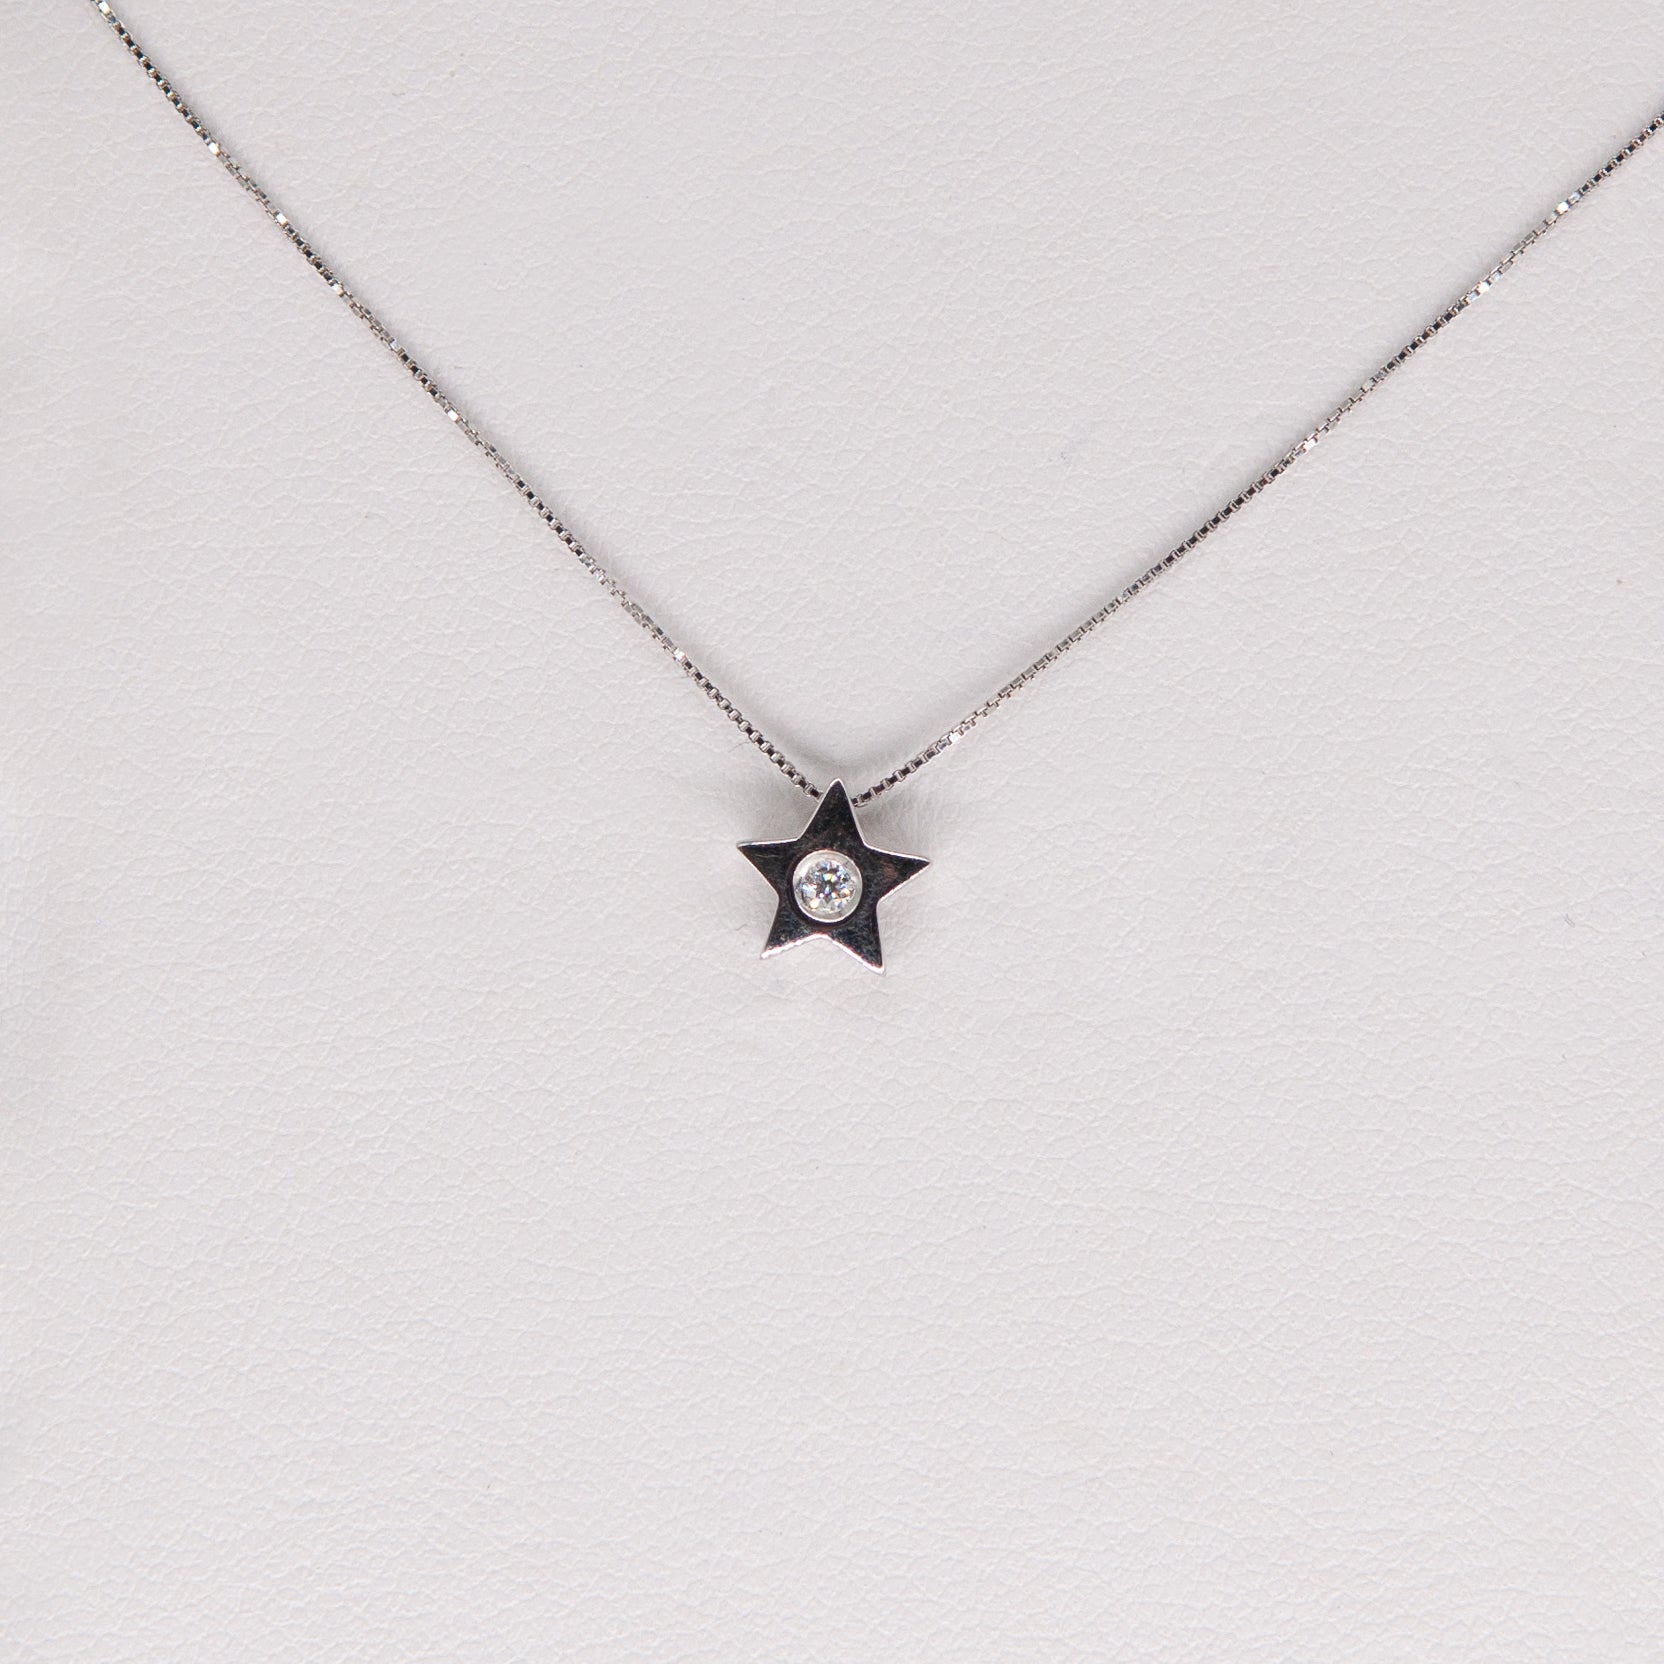 Full star necklace with diamond